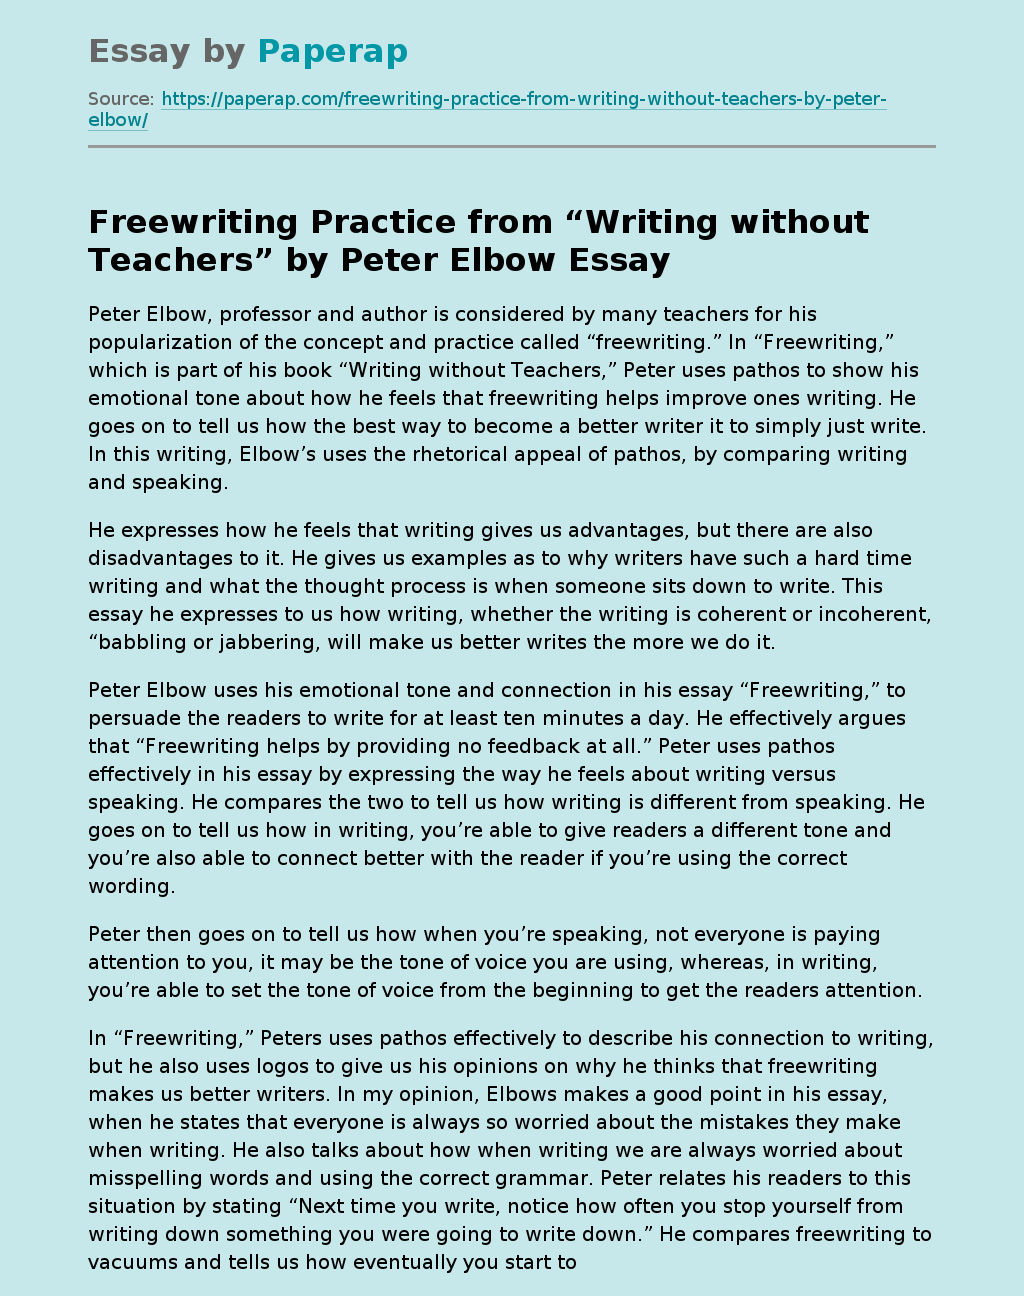 Freewriting Practice from “Writing without Teachers” by Peter Elbow